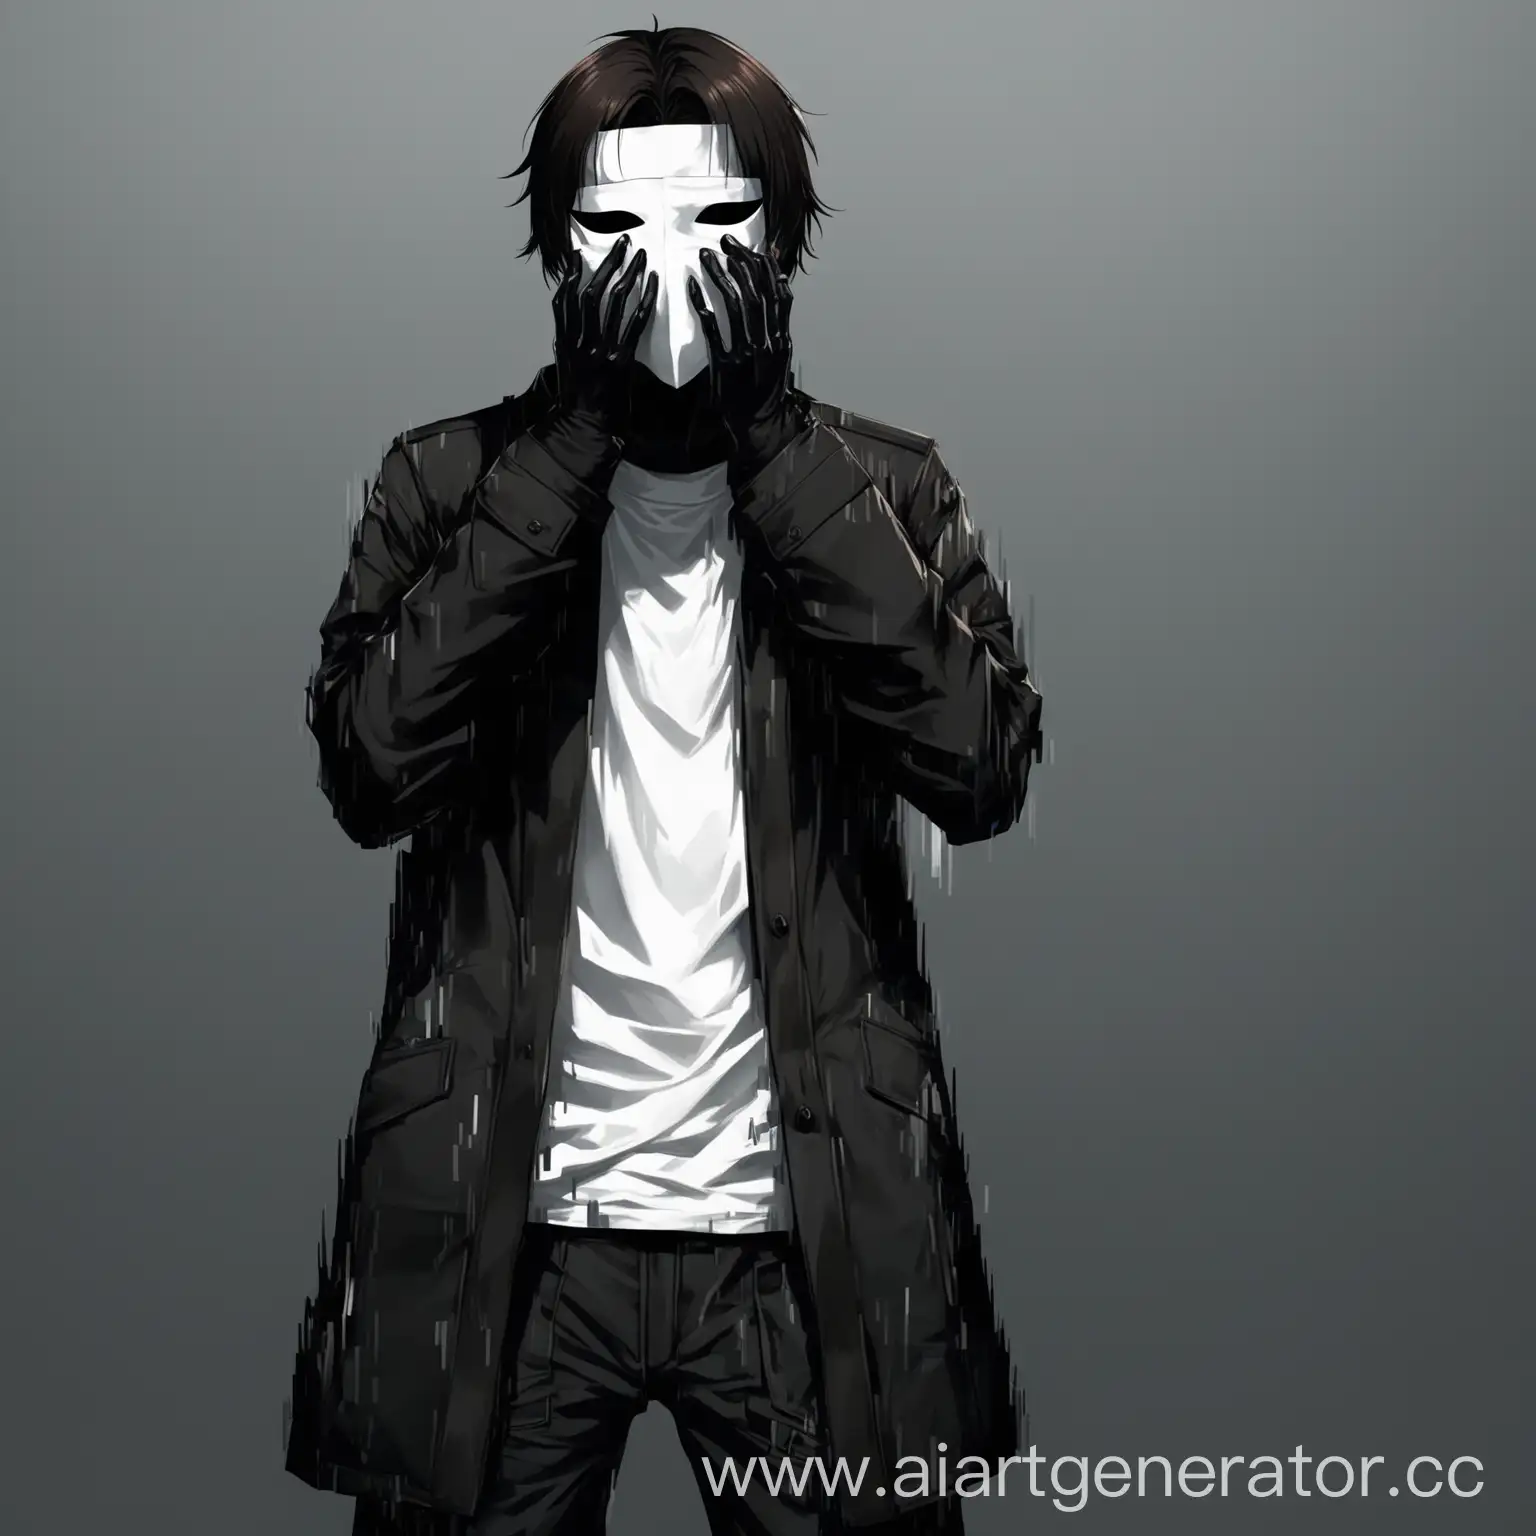 Mysterious-Figure-in-Black-Coat-with-Mask